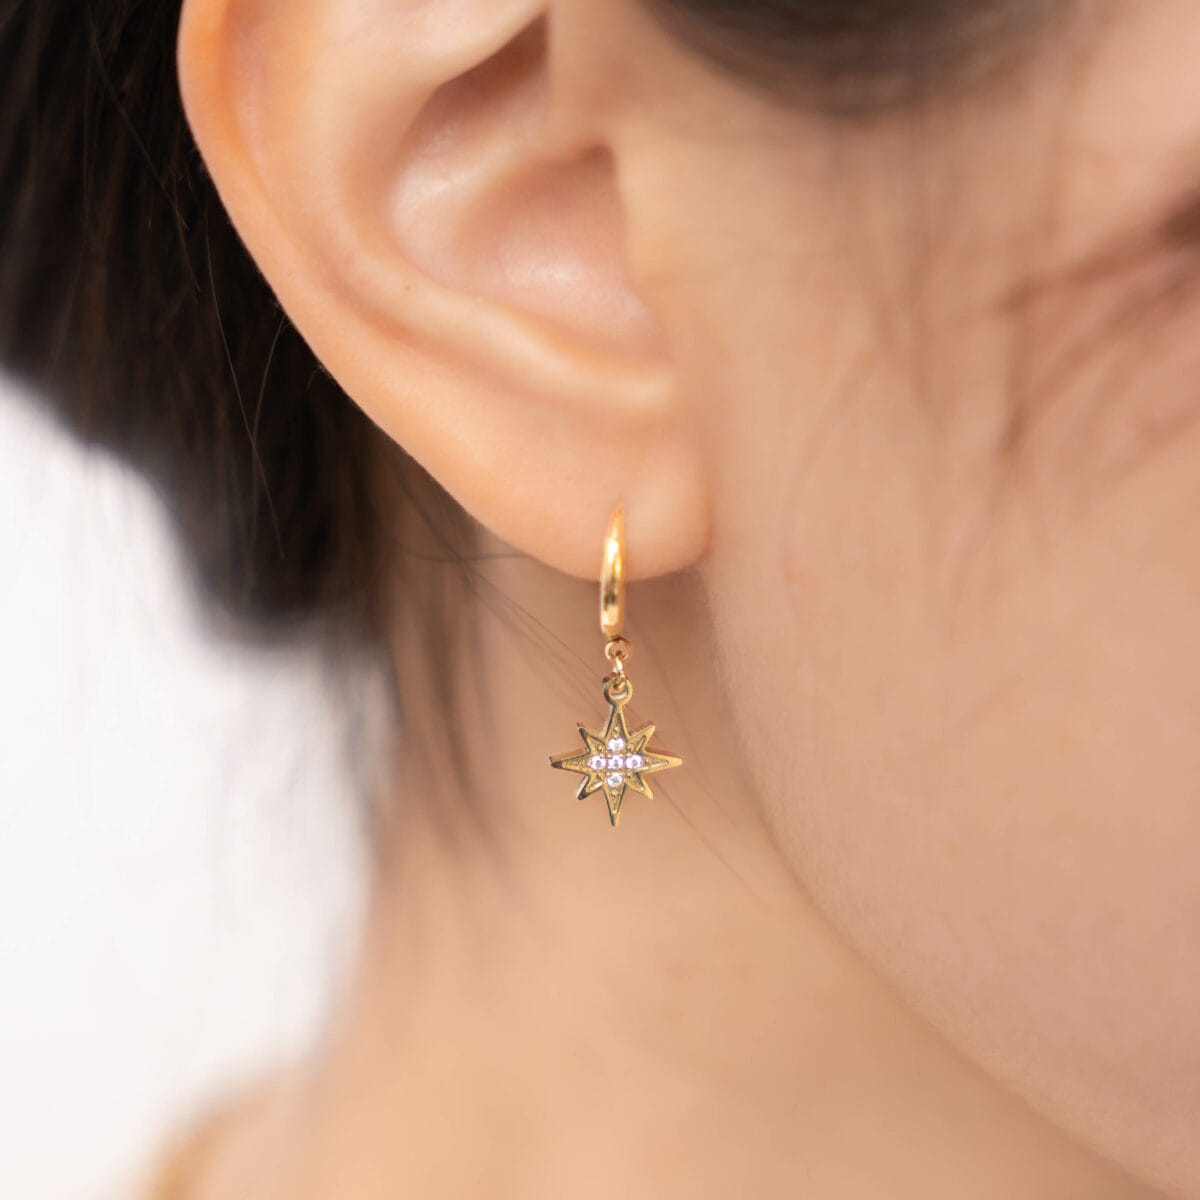 https://m.clubbella.co/product/18k-gold-plated-symbolic-asymmetrical-earrings/ Resized (85 of 134)